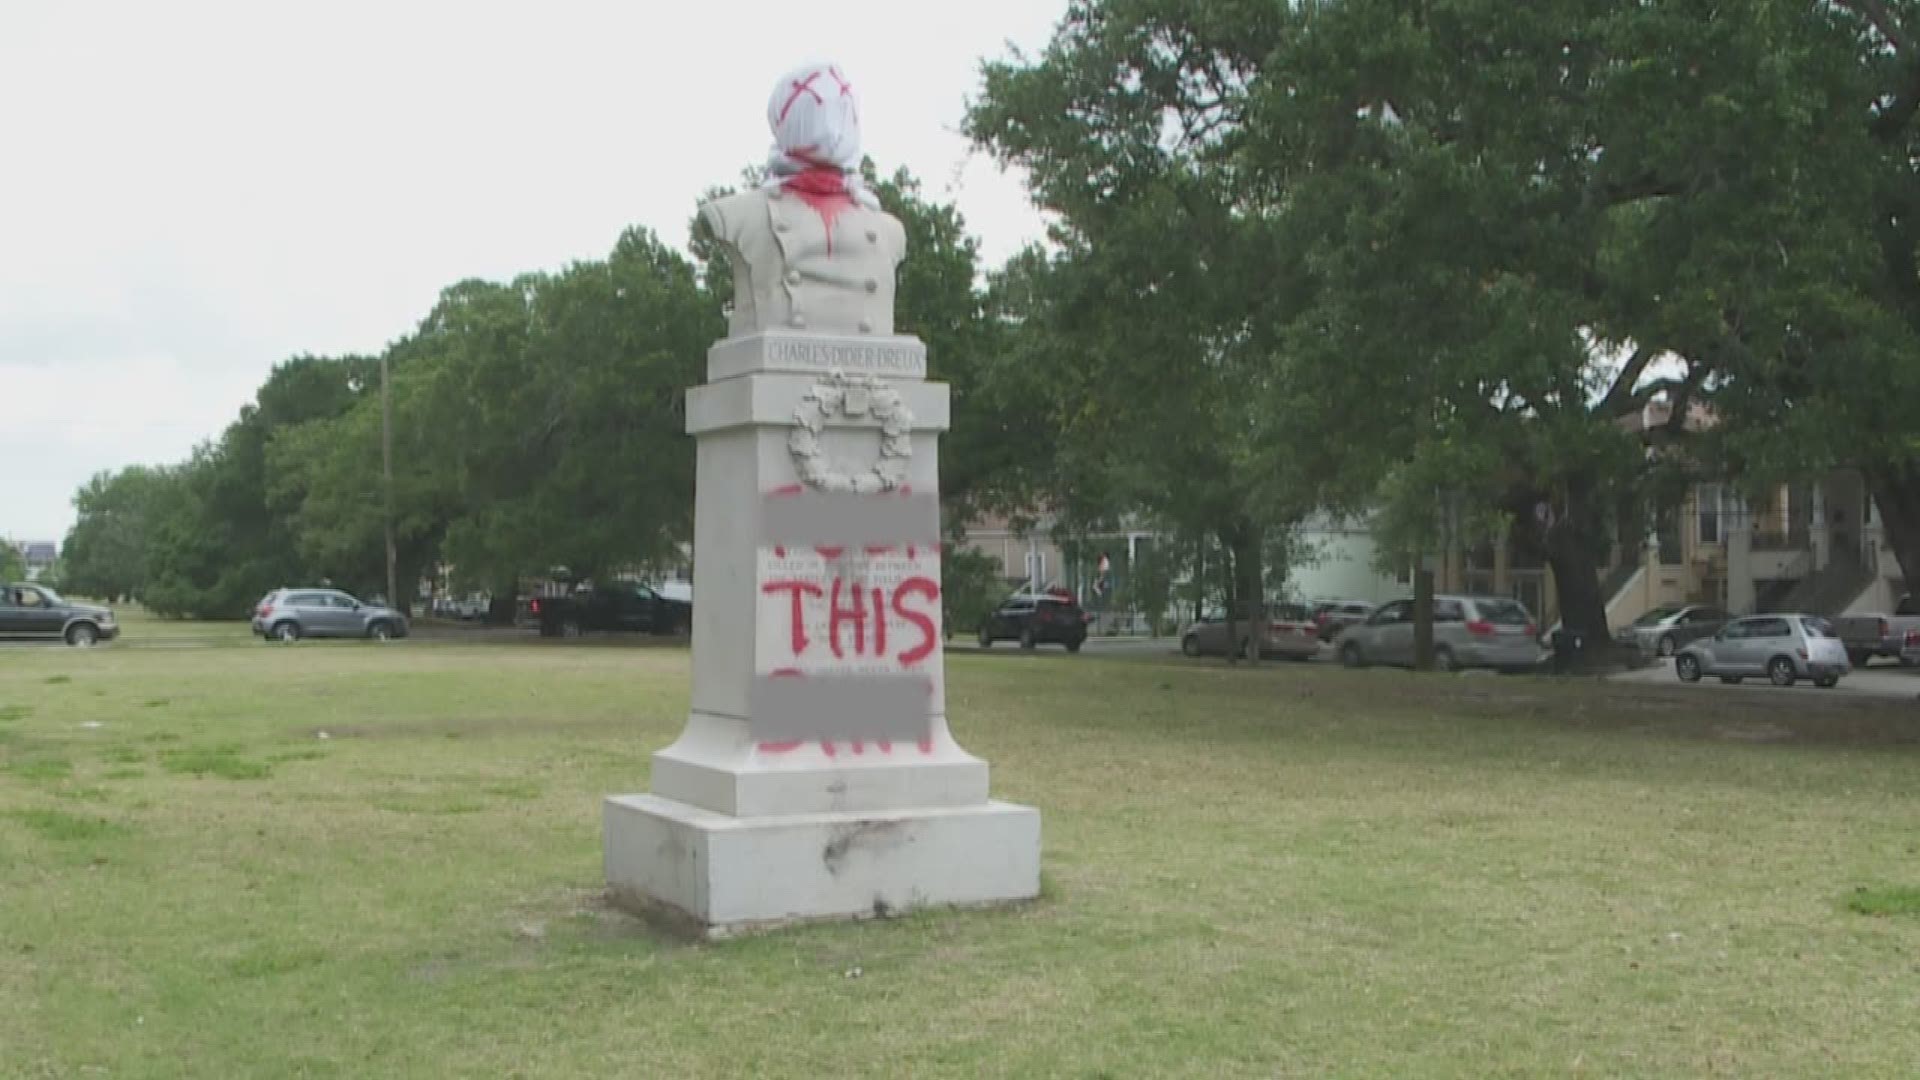 As the image began being shared on social media, people started arriving on the neutral ground on South Jefferson Davis Parkway and Canal Street. 